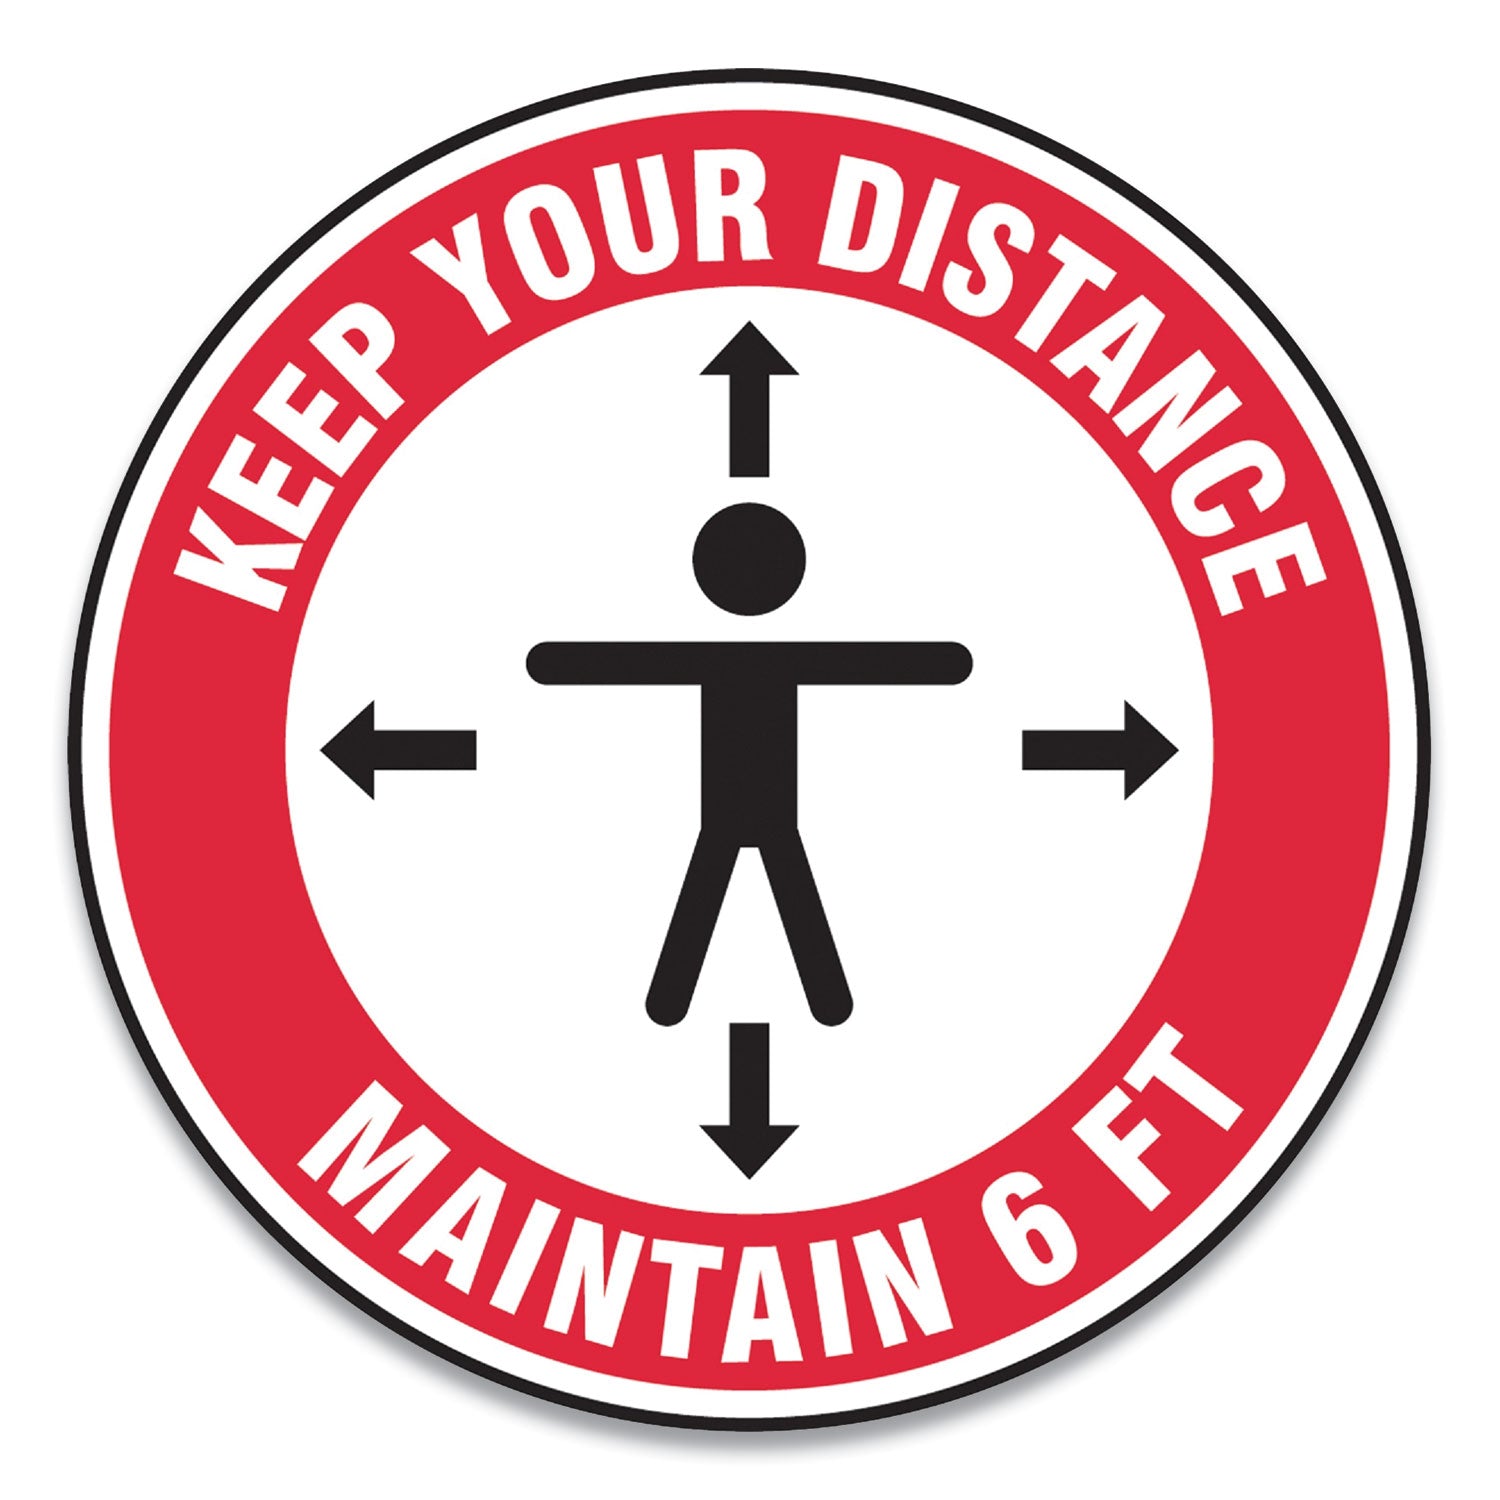 slip-gard-social-distance-floor-signs-17-circle-keep-your-distance-maintain-6-ft-human-arrows-red-white-25-pack_gn1mfs347esp - 1